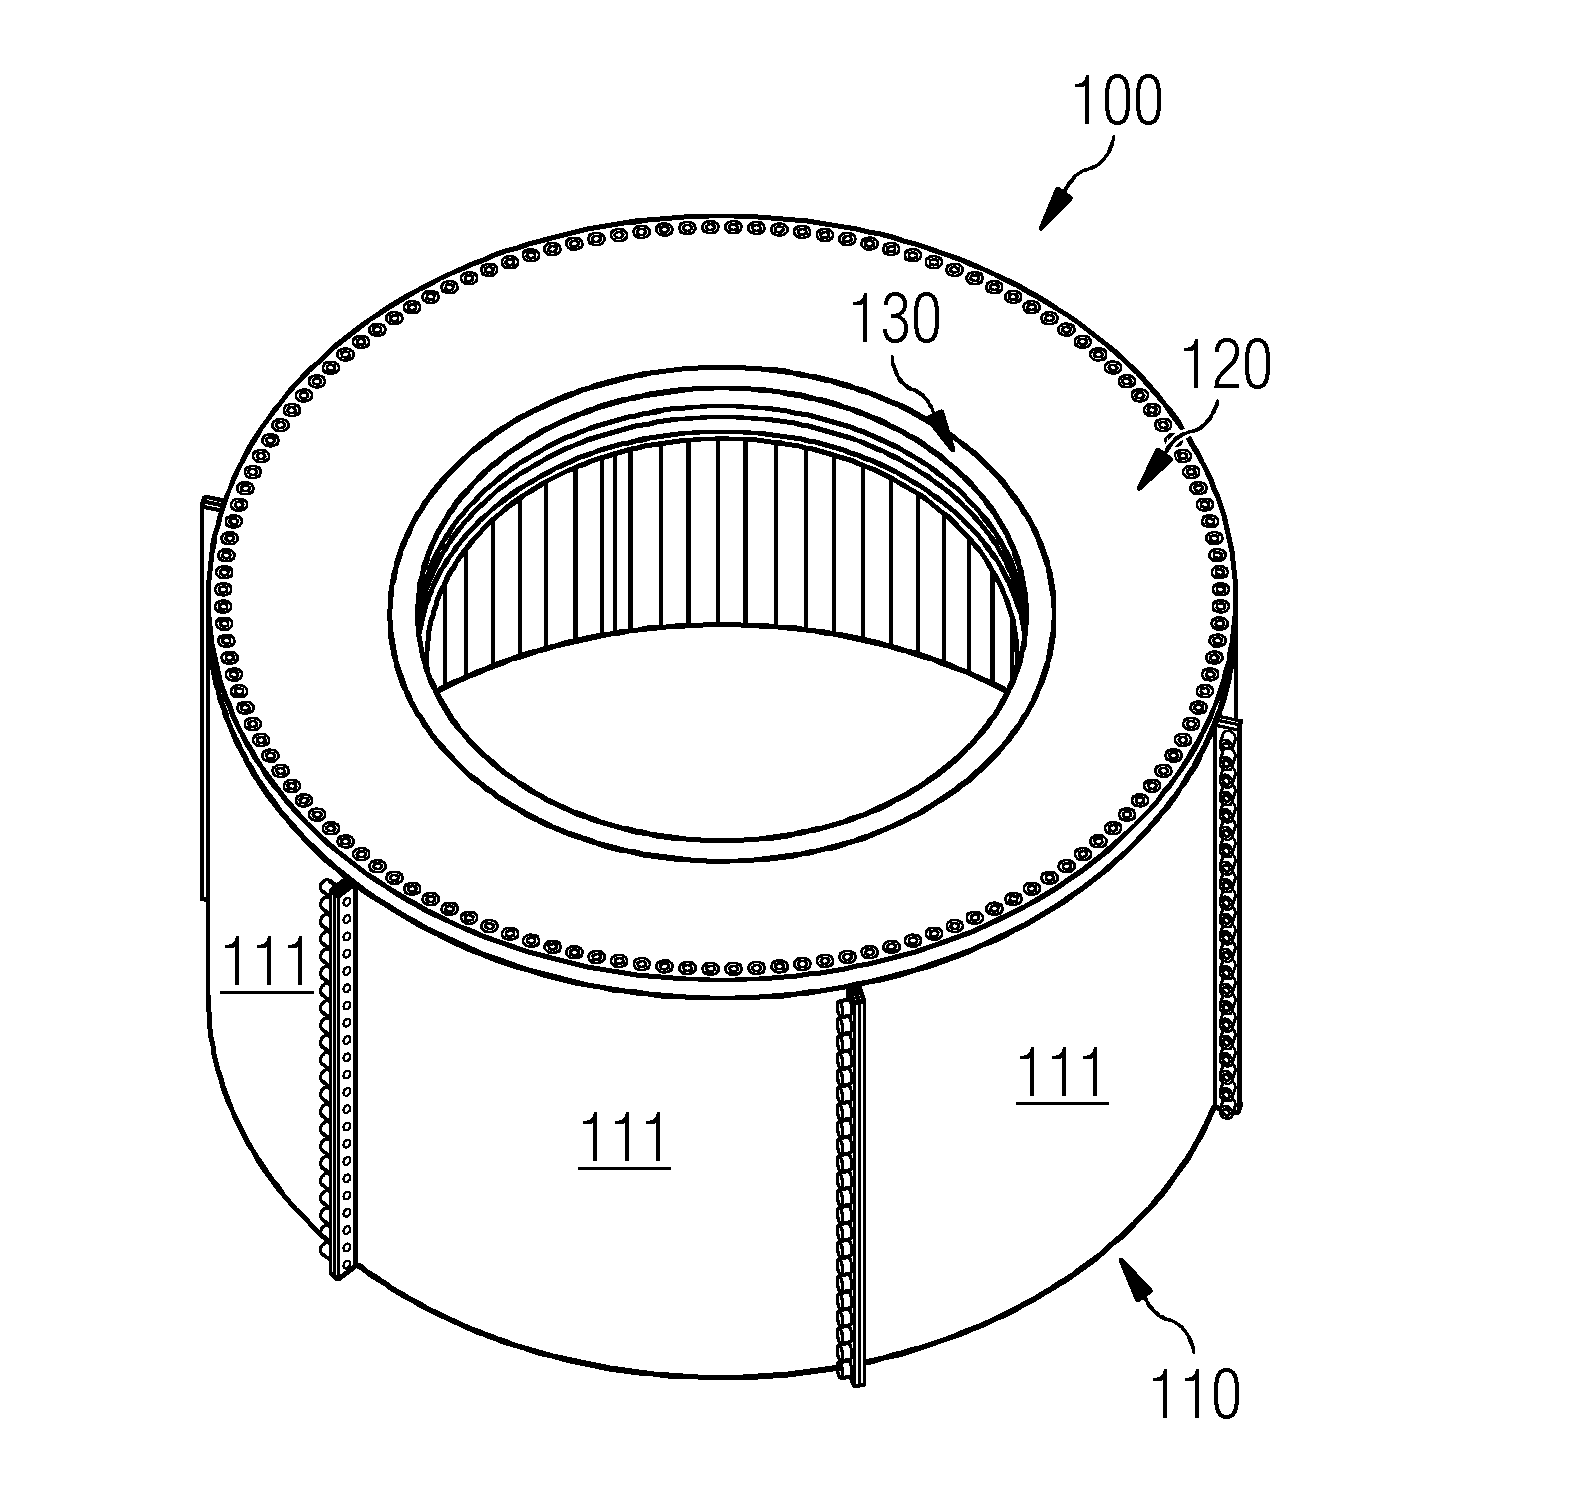 Wind turbine, a generator, a rotor housing, and a method for making the rotor housing